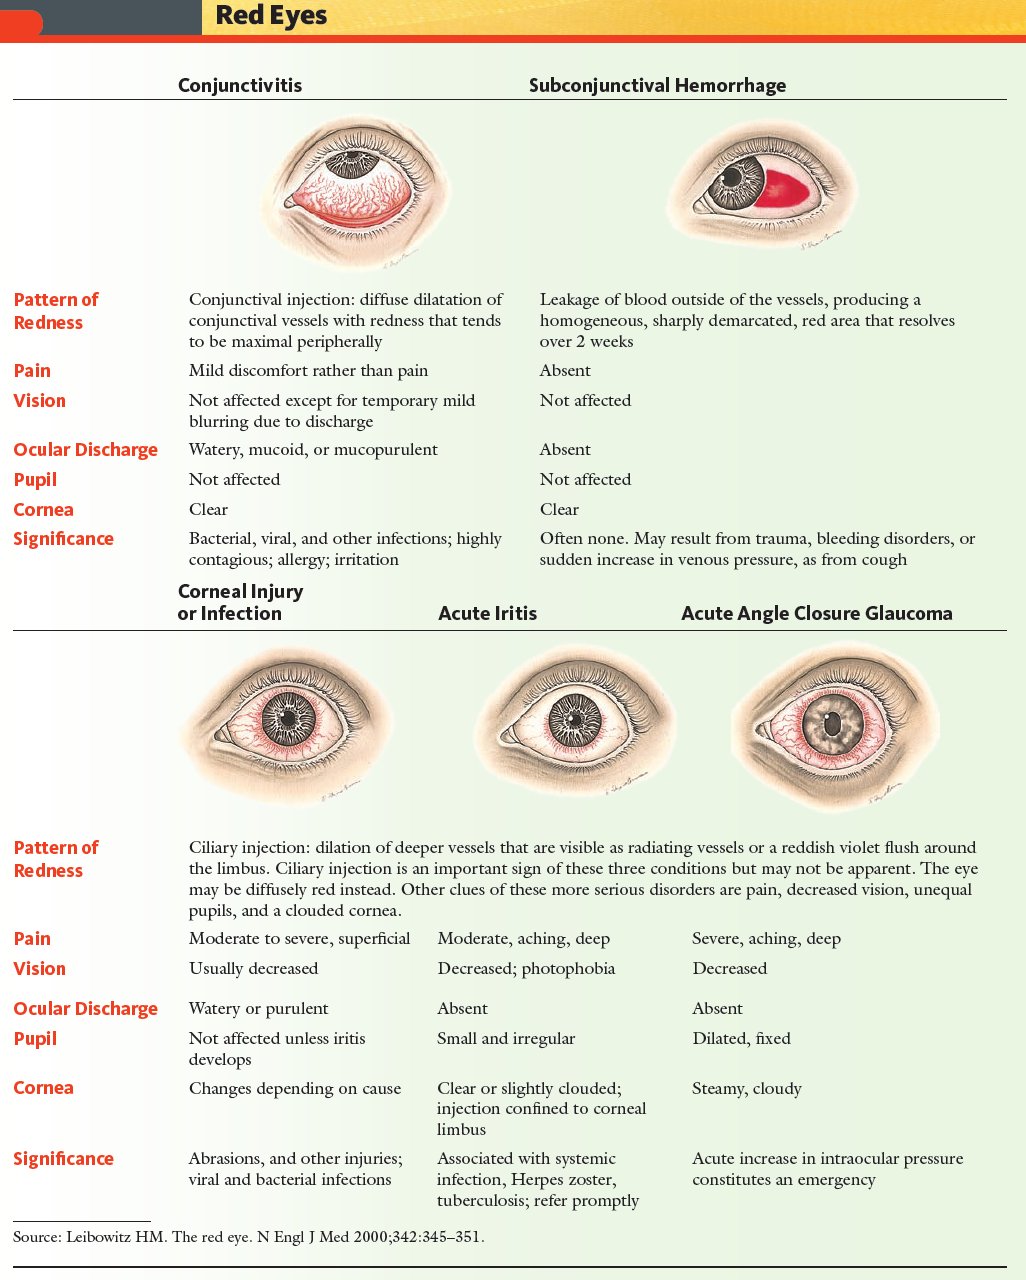 Causes of Red Eye - Treatment at AMDA SG Tel: 6694 1661